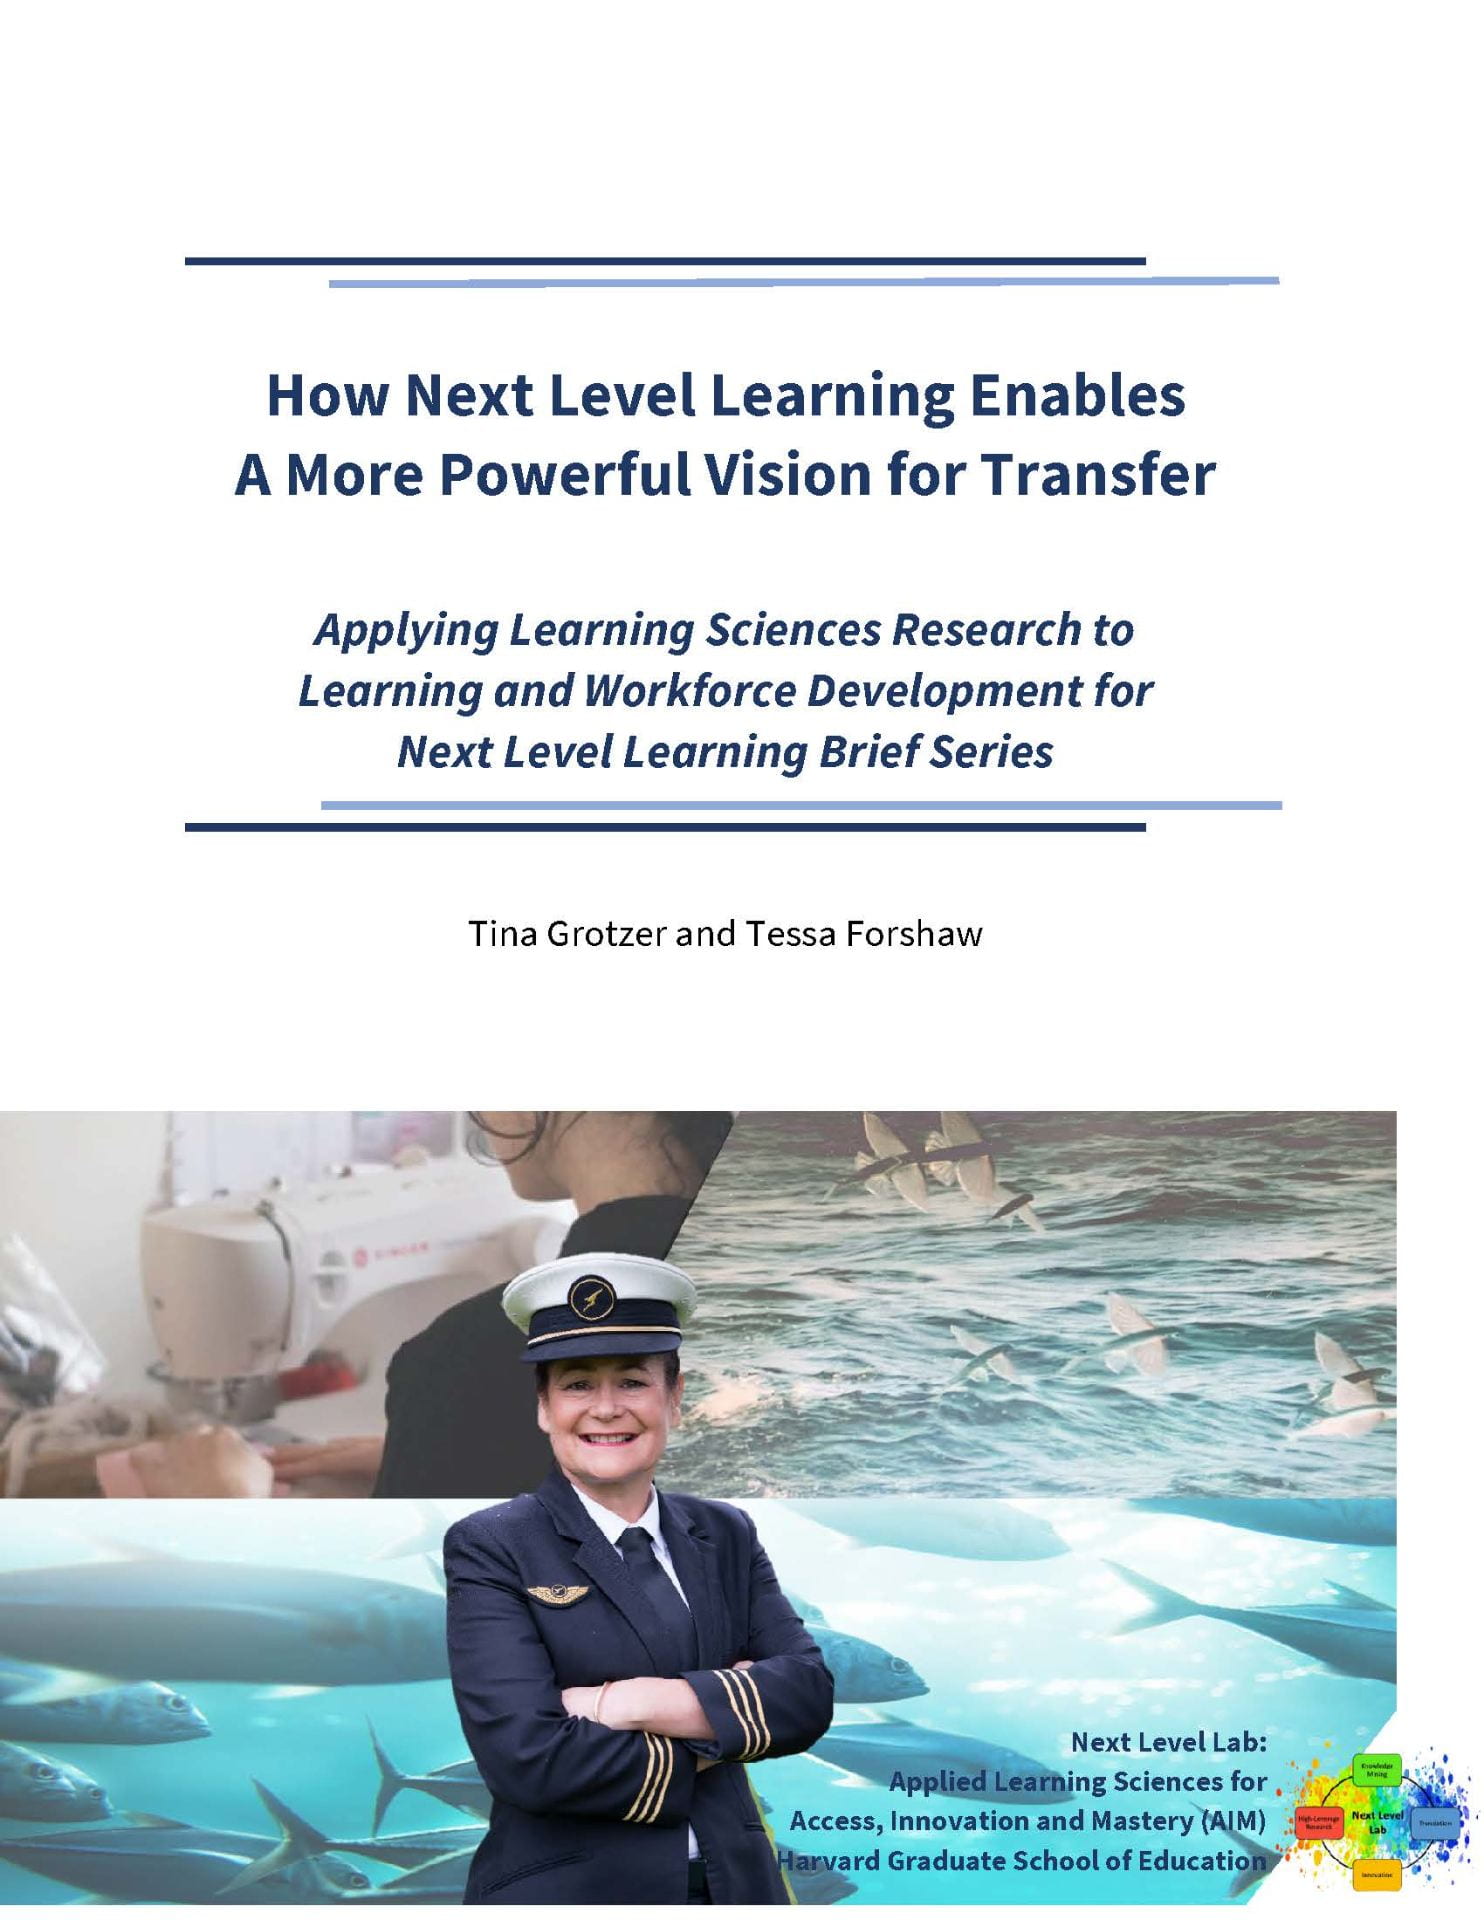 How Next Level Learning Enables A More Powerful Vision for Transfer